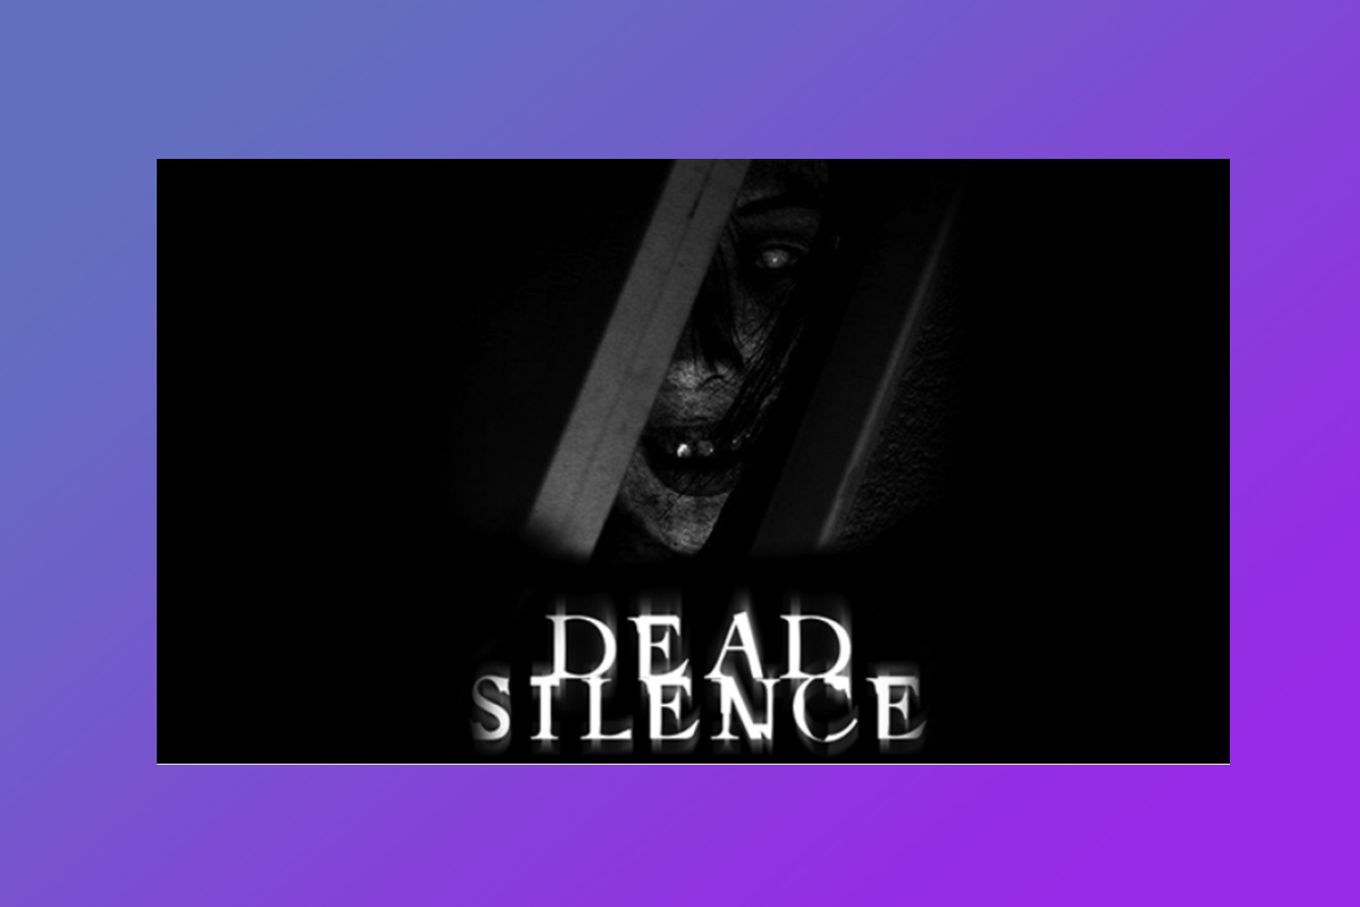 Oldest Roblox Games - Dead Silence